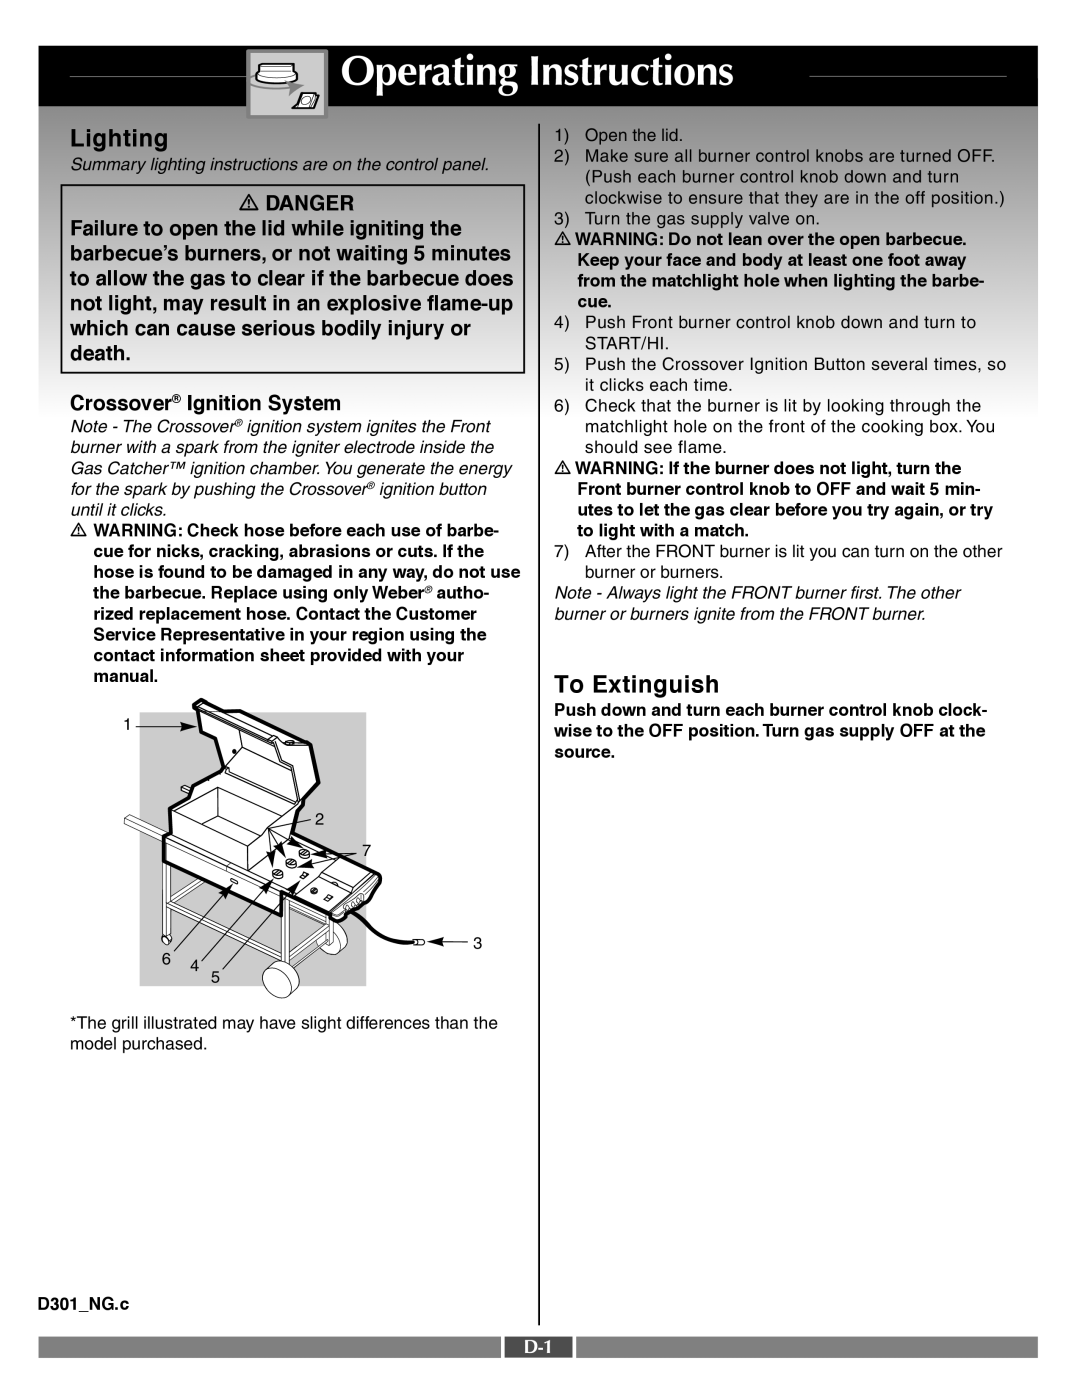 Weber 55556 manual Operating Instructions, Lighting, To Extinguish, Crossover Ignition System, Danger 